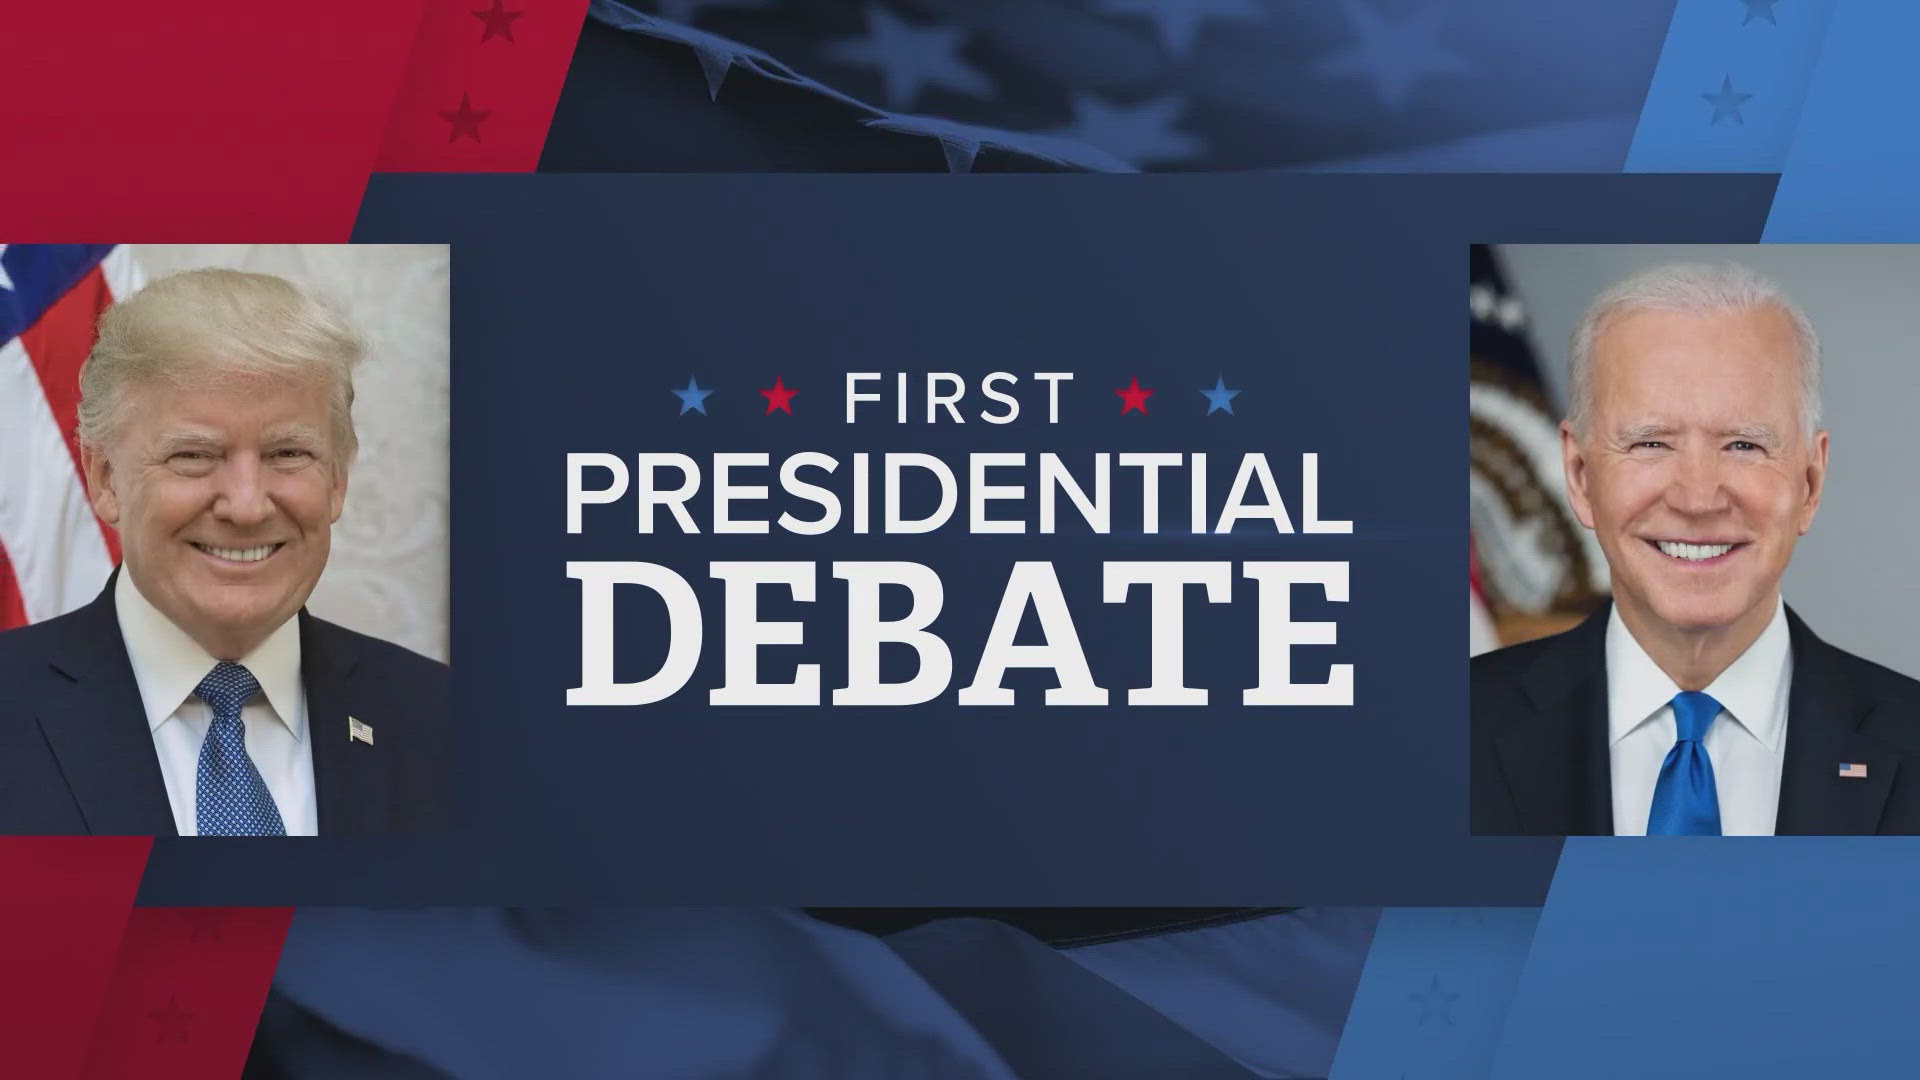 Final preparations are being made as President Biden and former President Trump are scheduled to take to the stage in their first debate.